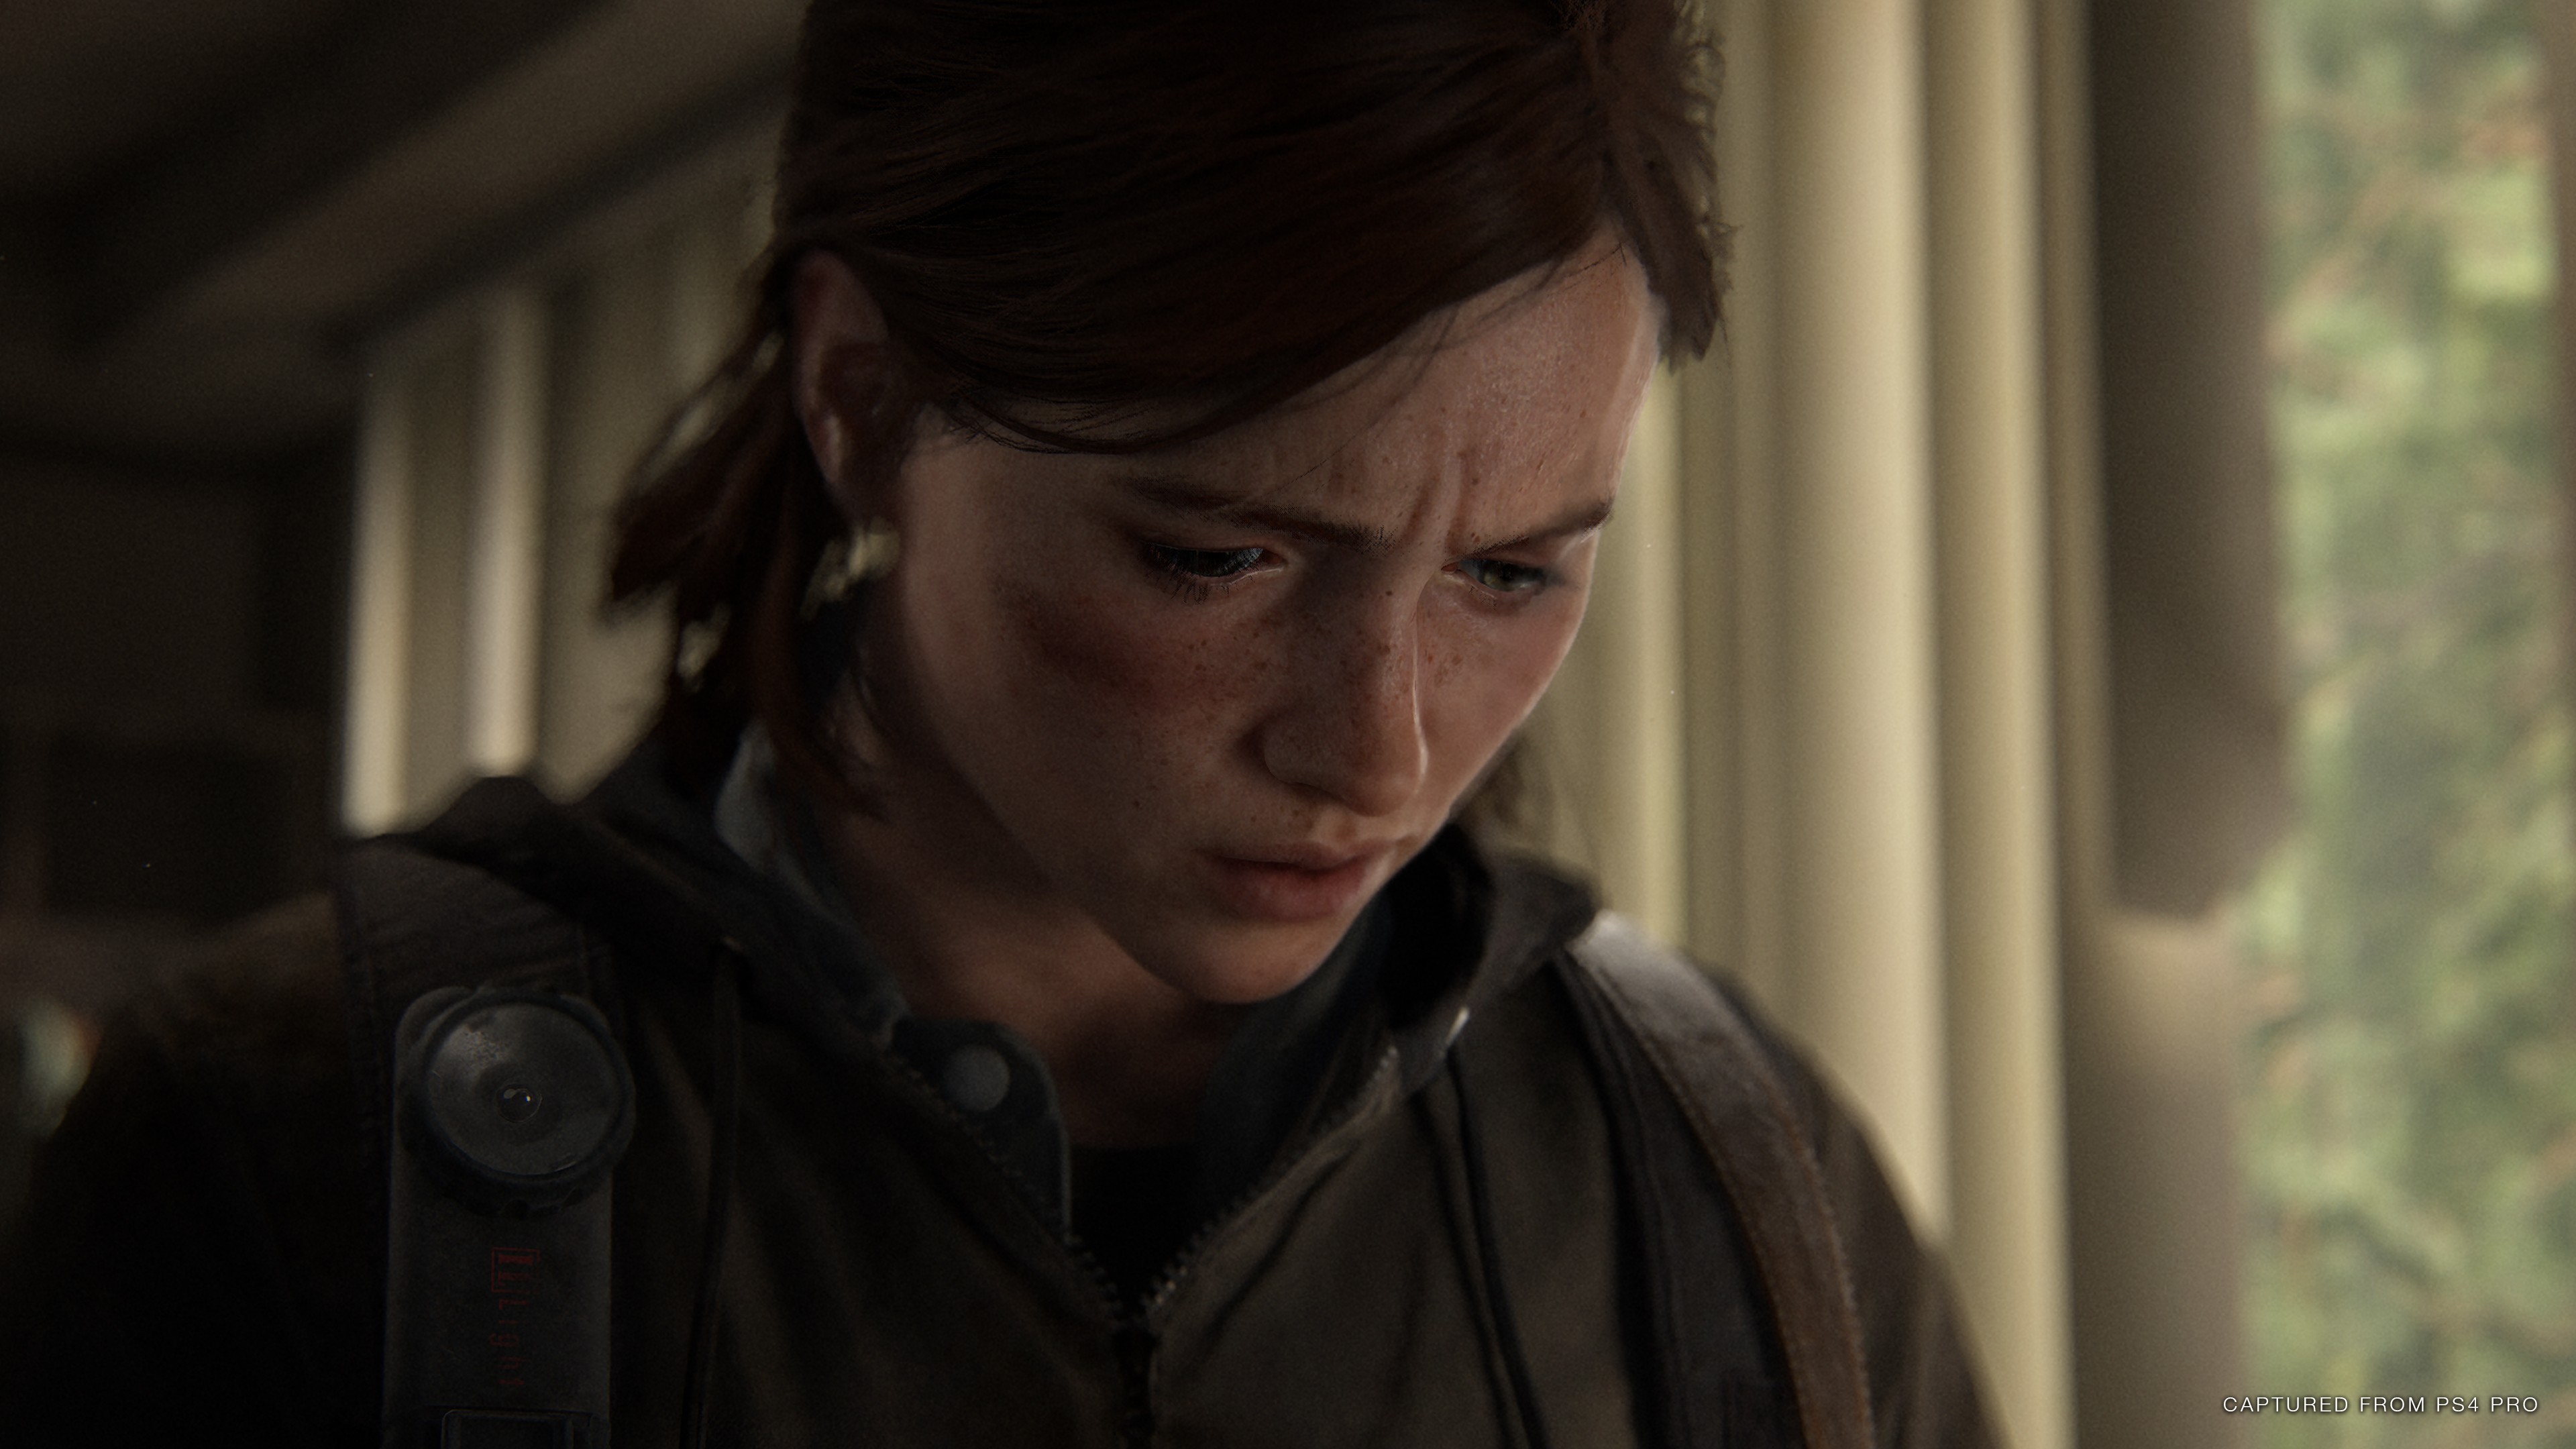 The Last of Us Part 2: Abby's Fate Explained